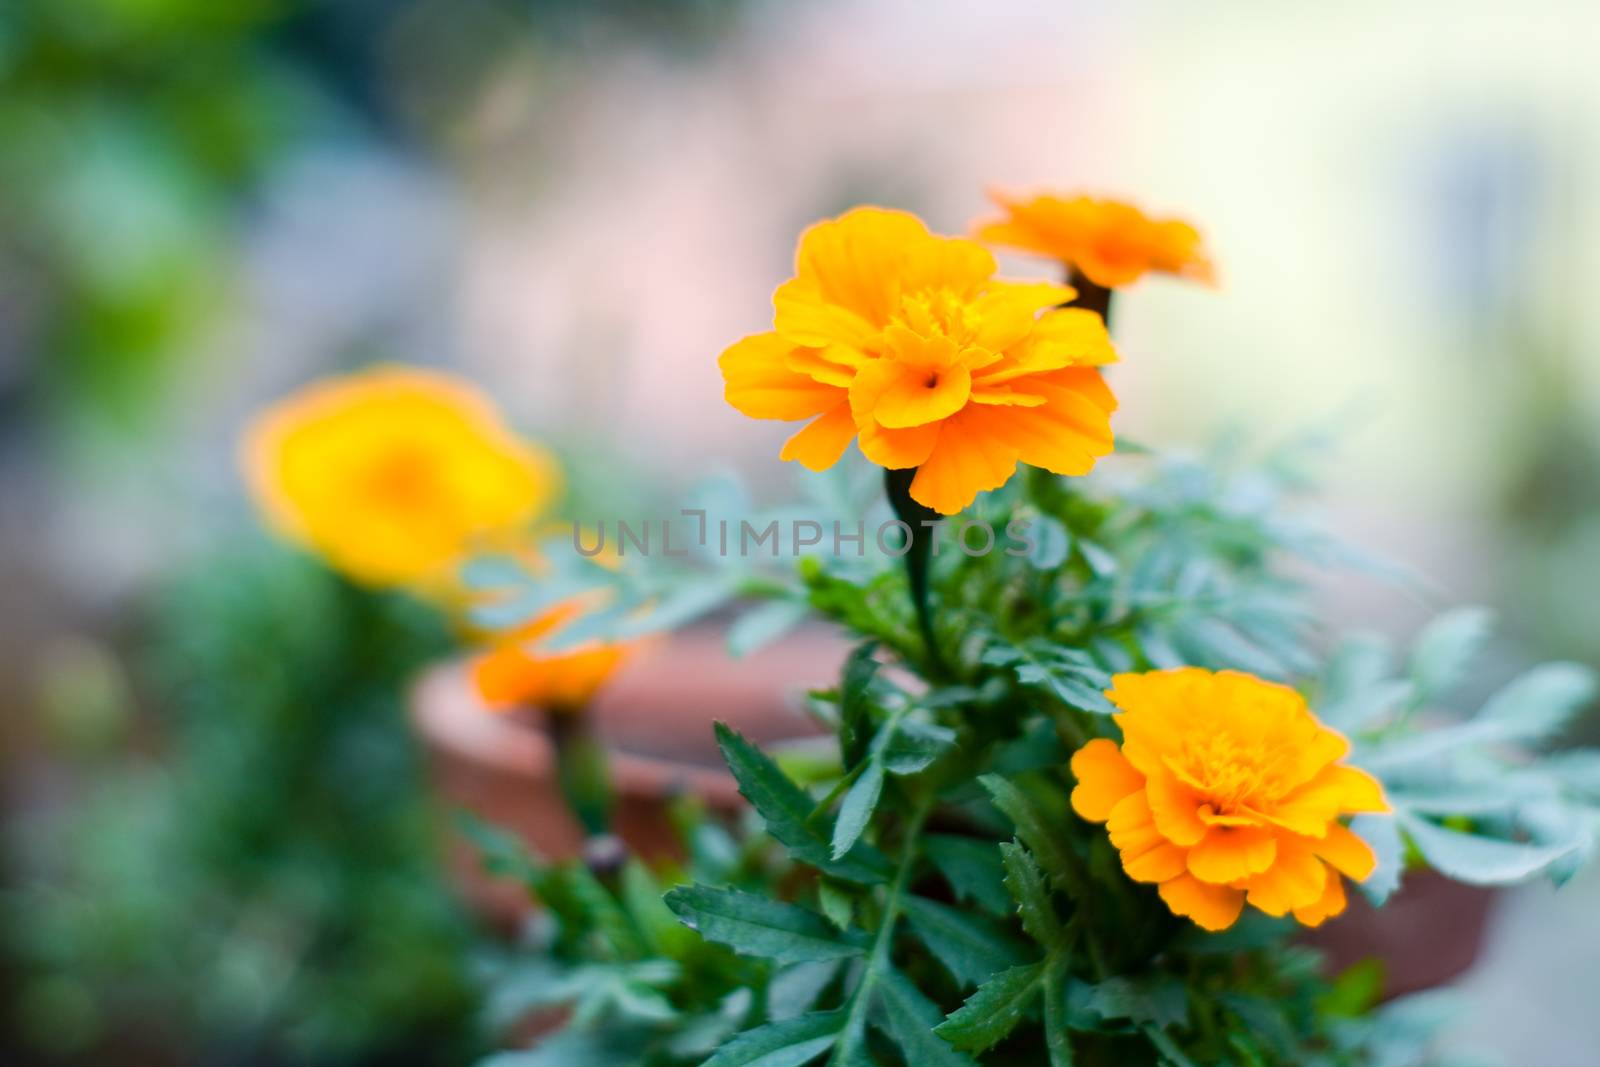 Close up of beautiful yellow marigold flower with green leaves in sunlight. Tagetes is a genus or perennial, a herbaceous plants of sunflower family. Blooms naturally in golden, orange, yellow.